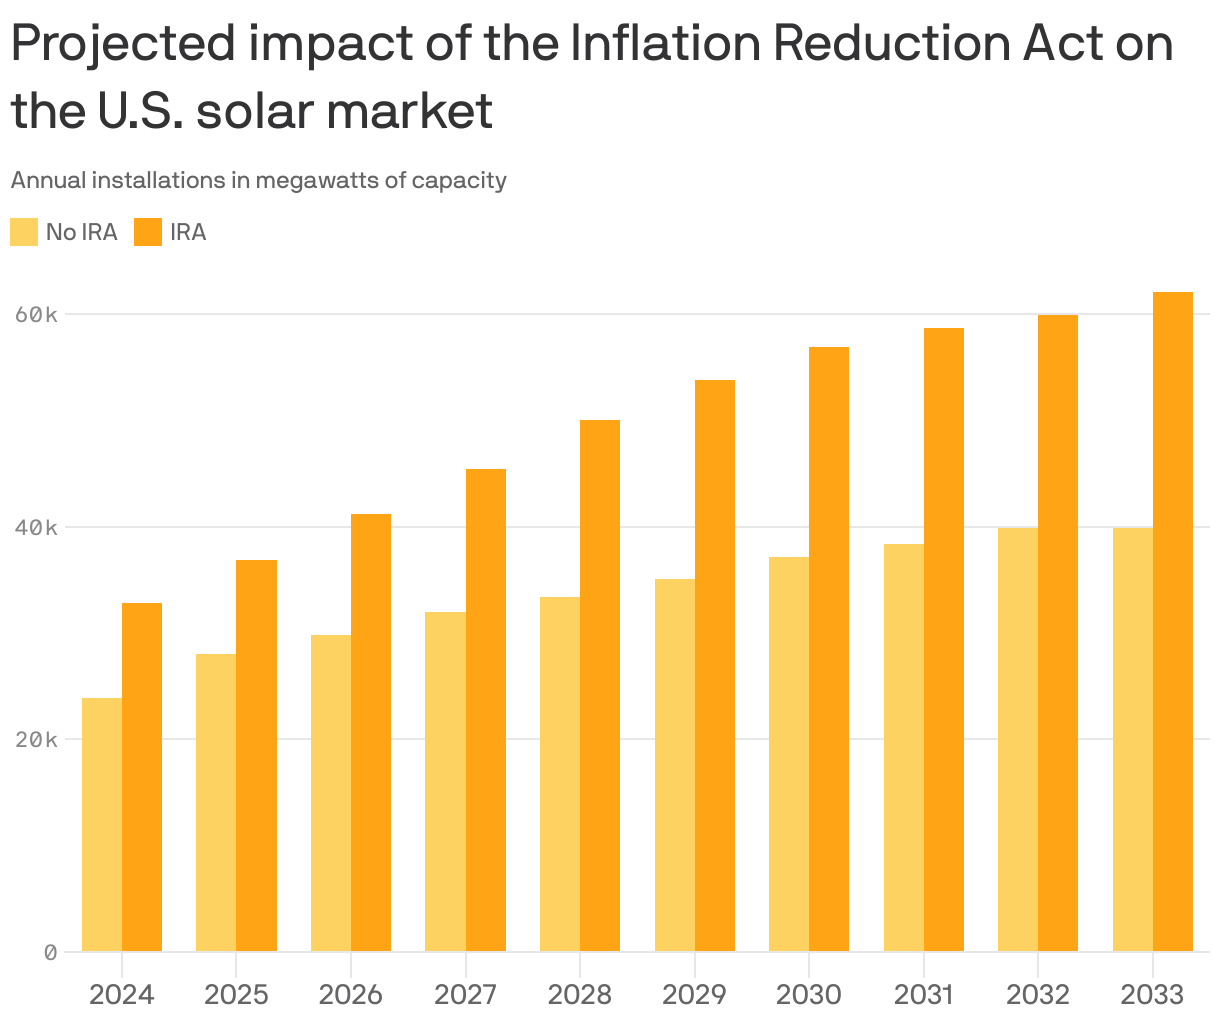 Projected impact of the Inflation Reduction Act on the U.S. solar market